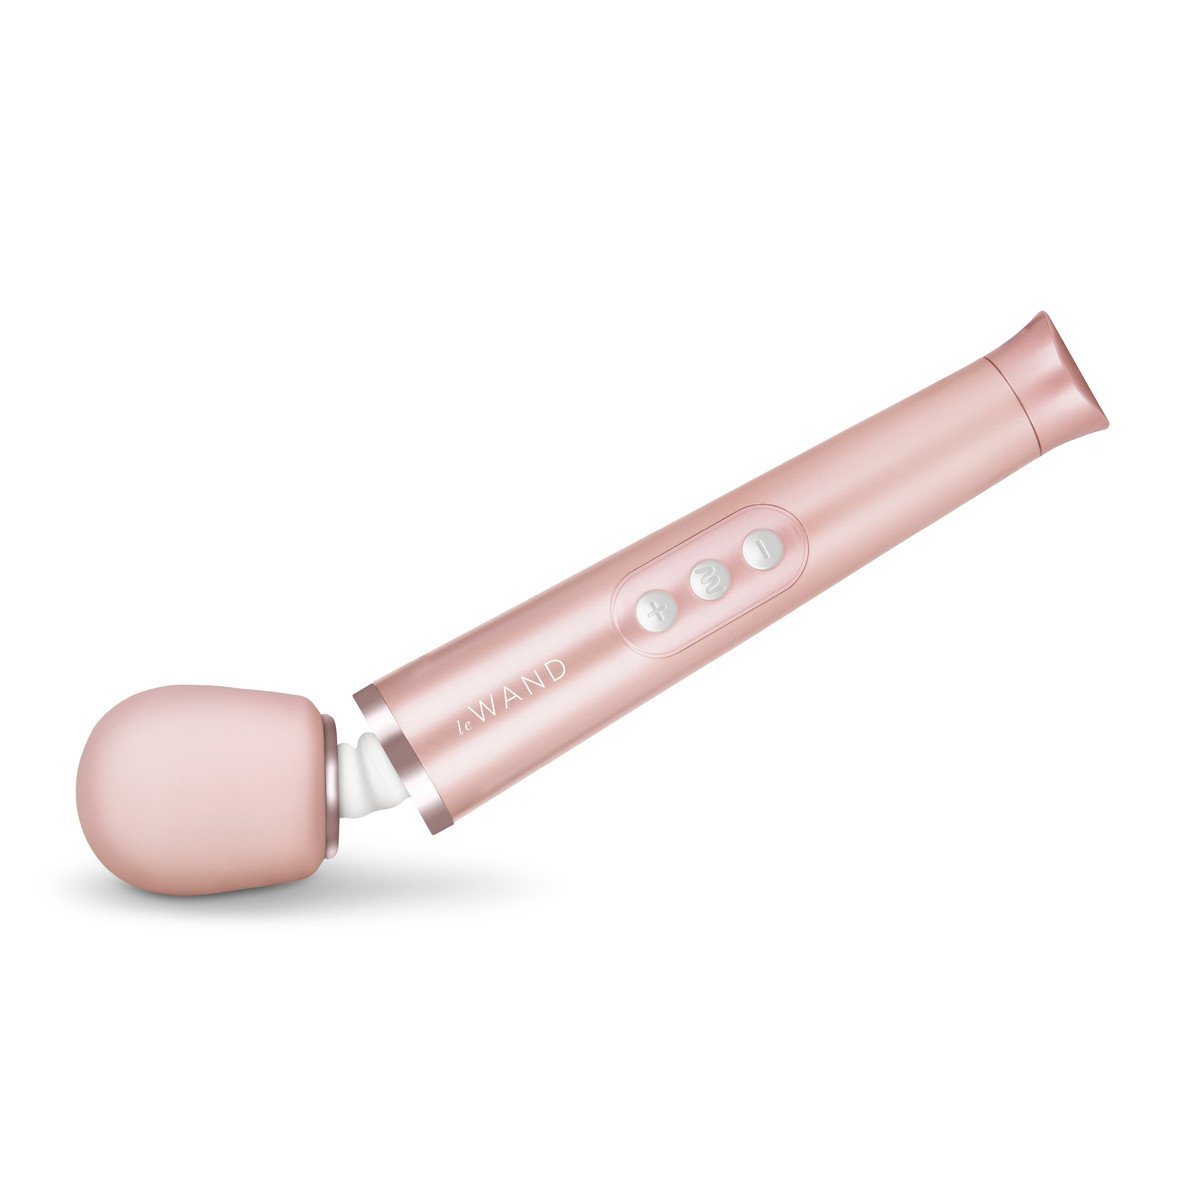 Rose gold Le Wand cordless rechargeable massager with bent soft silicone head Nudie Co